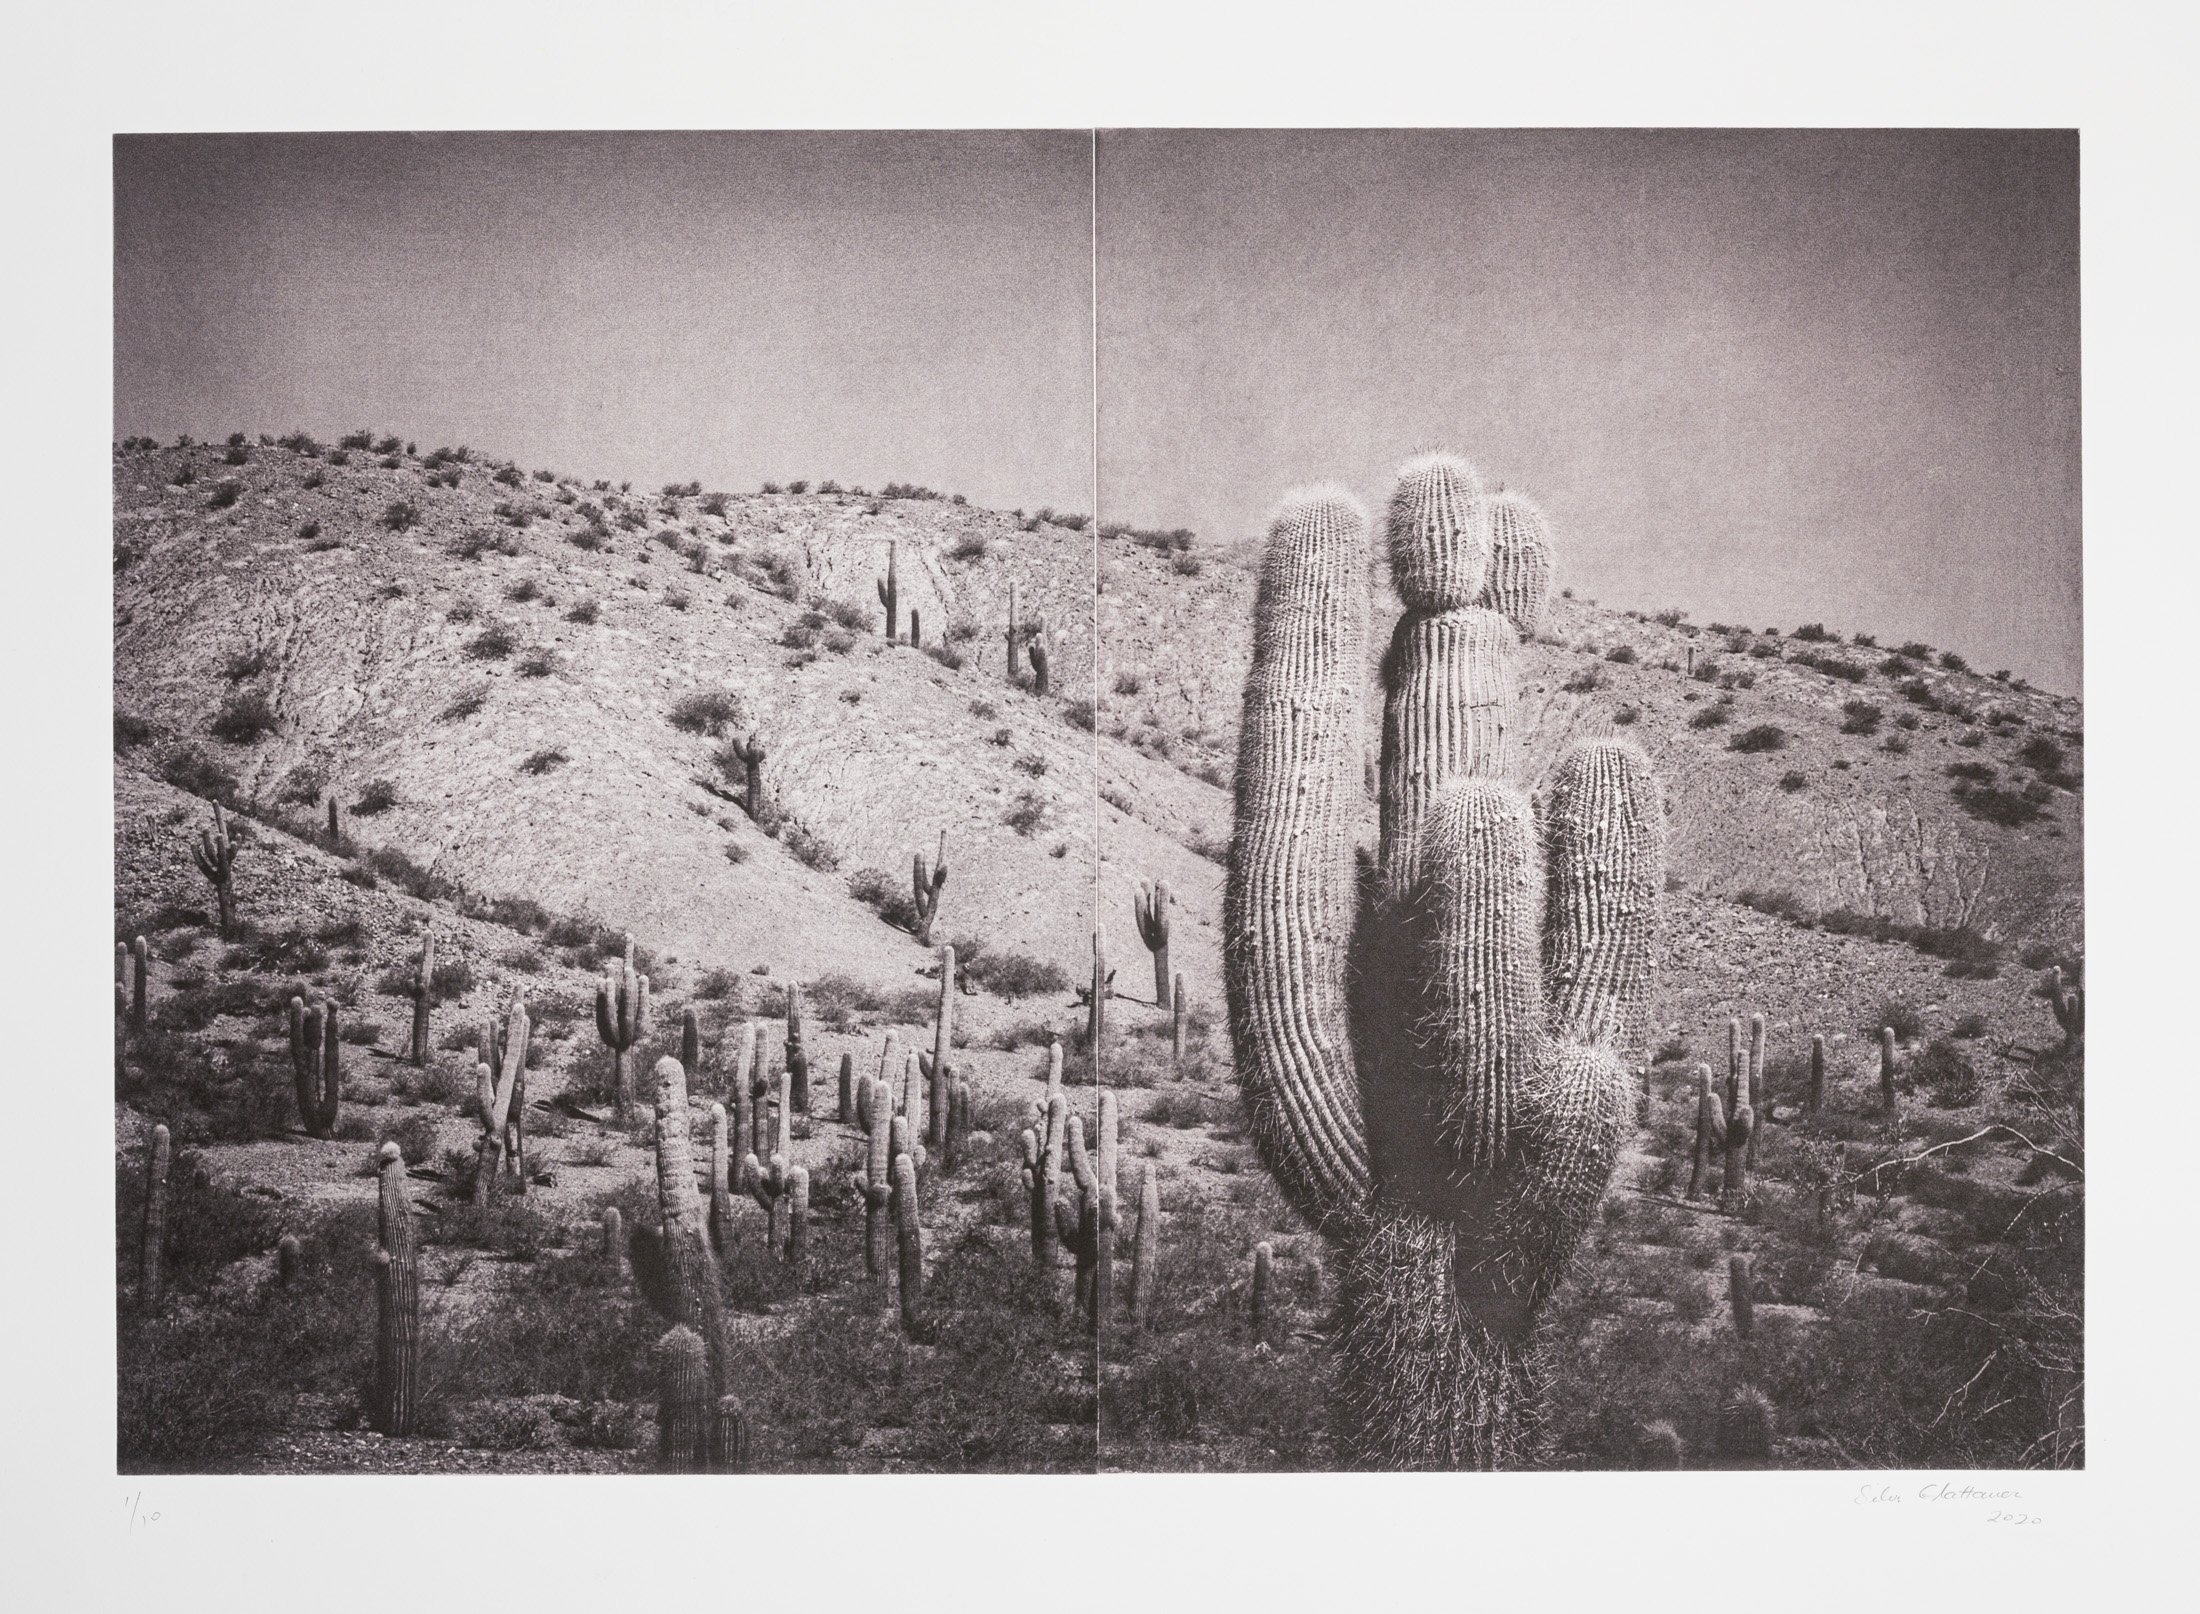 'In The Shade of A Cactus' 2 Plate Photogravure by Silvi Glattauer